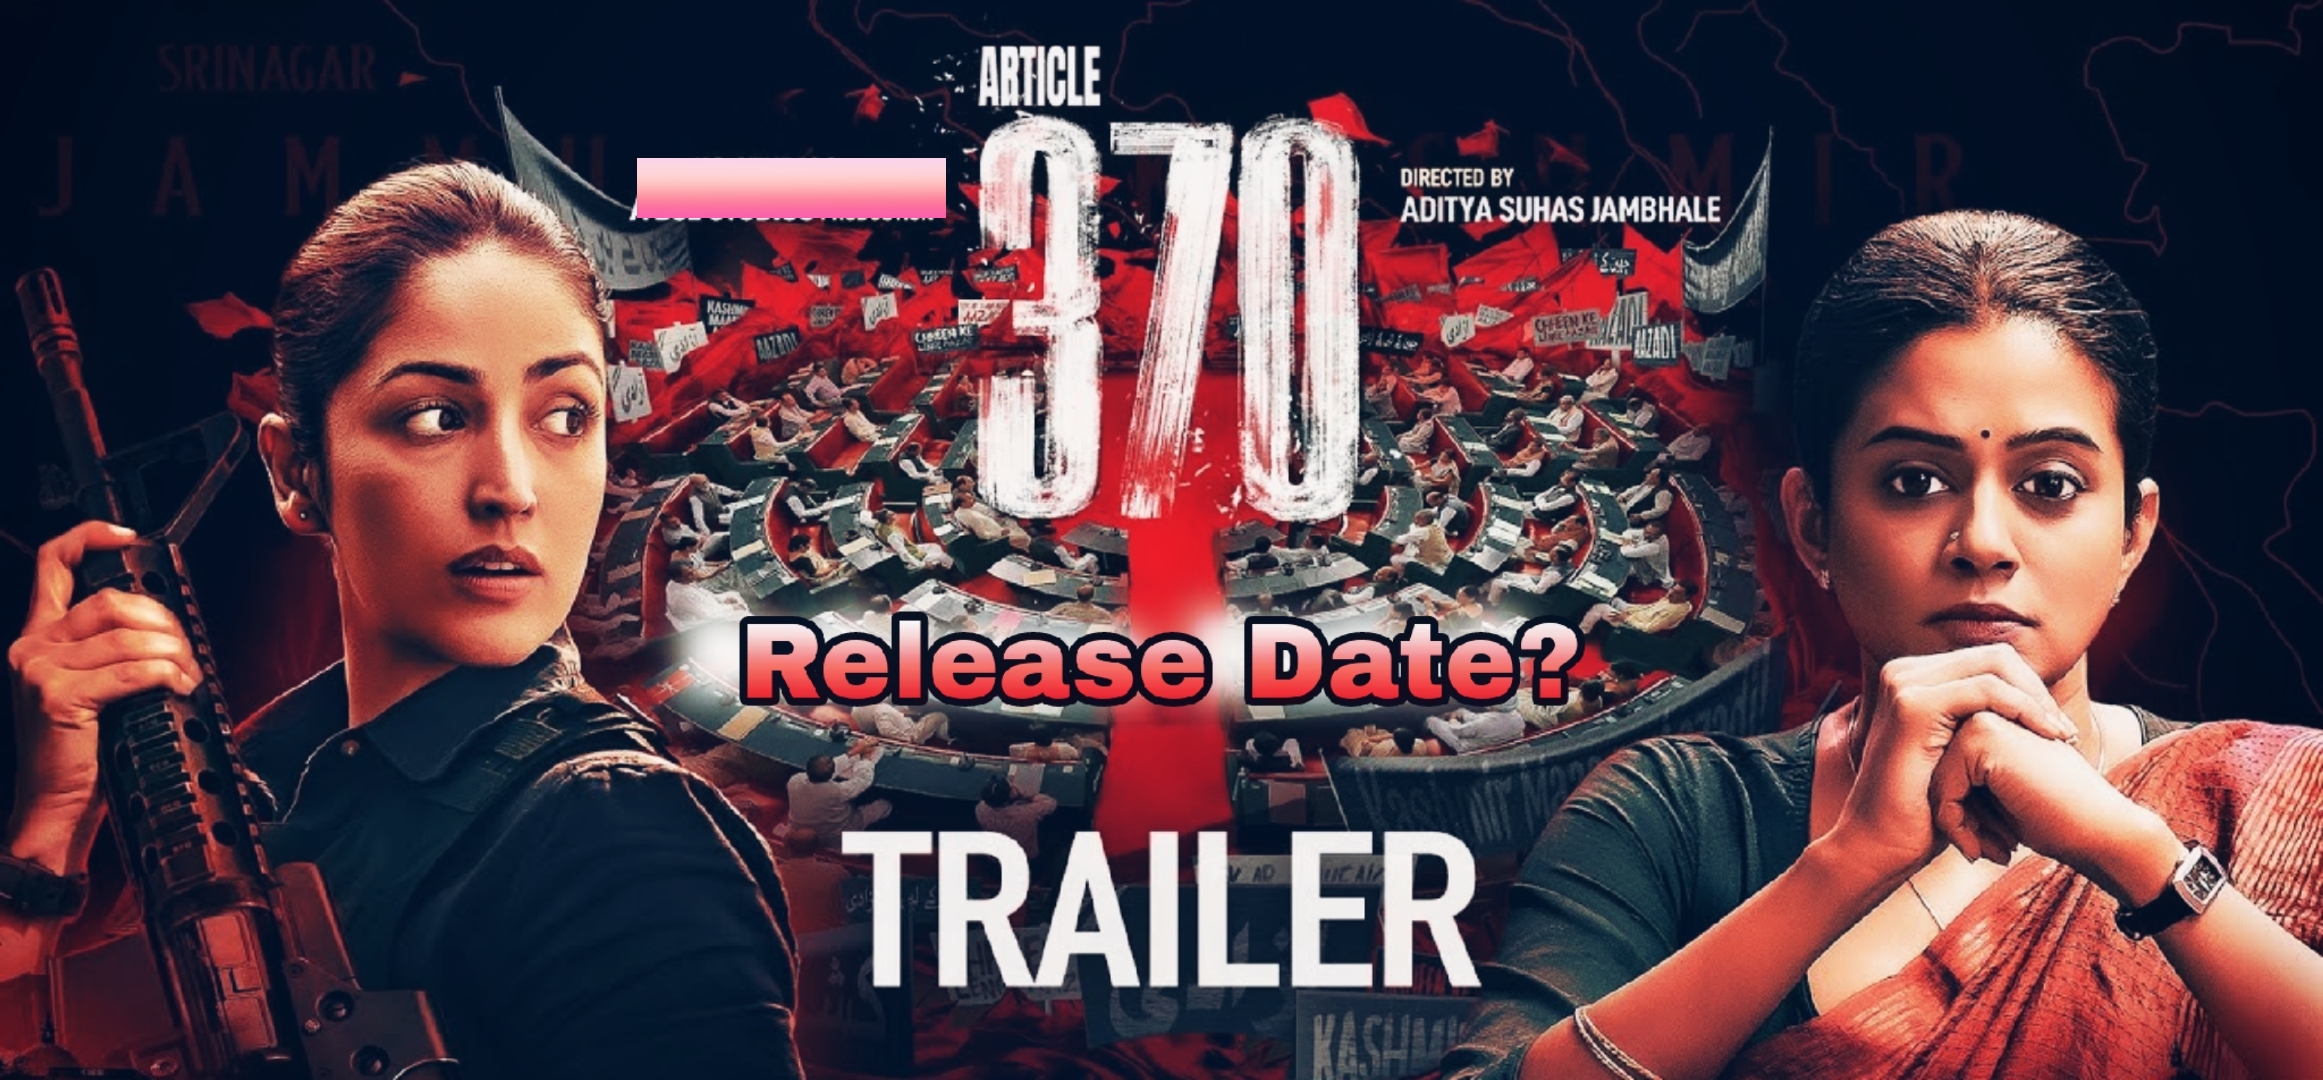 Article 370′ trailer New Movie Release Date?